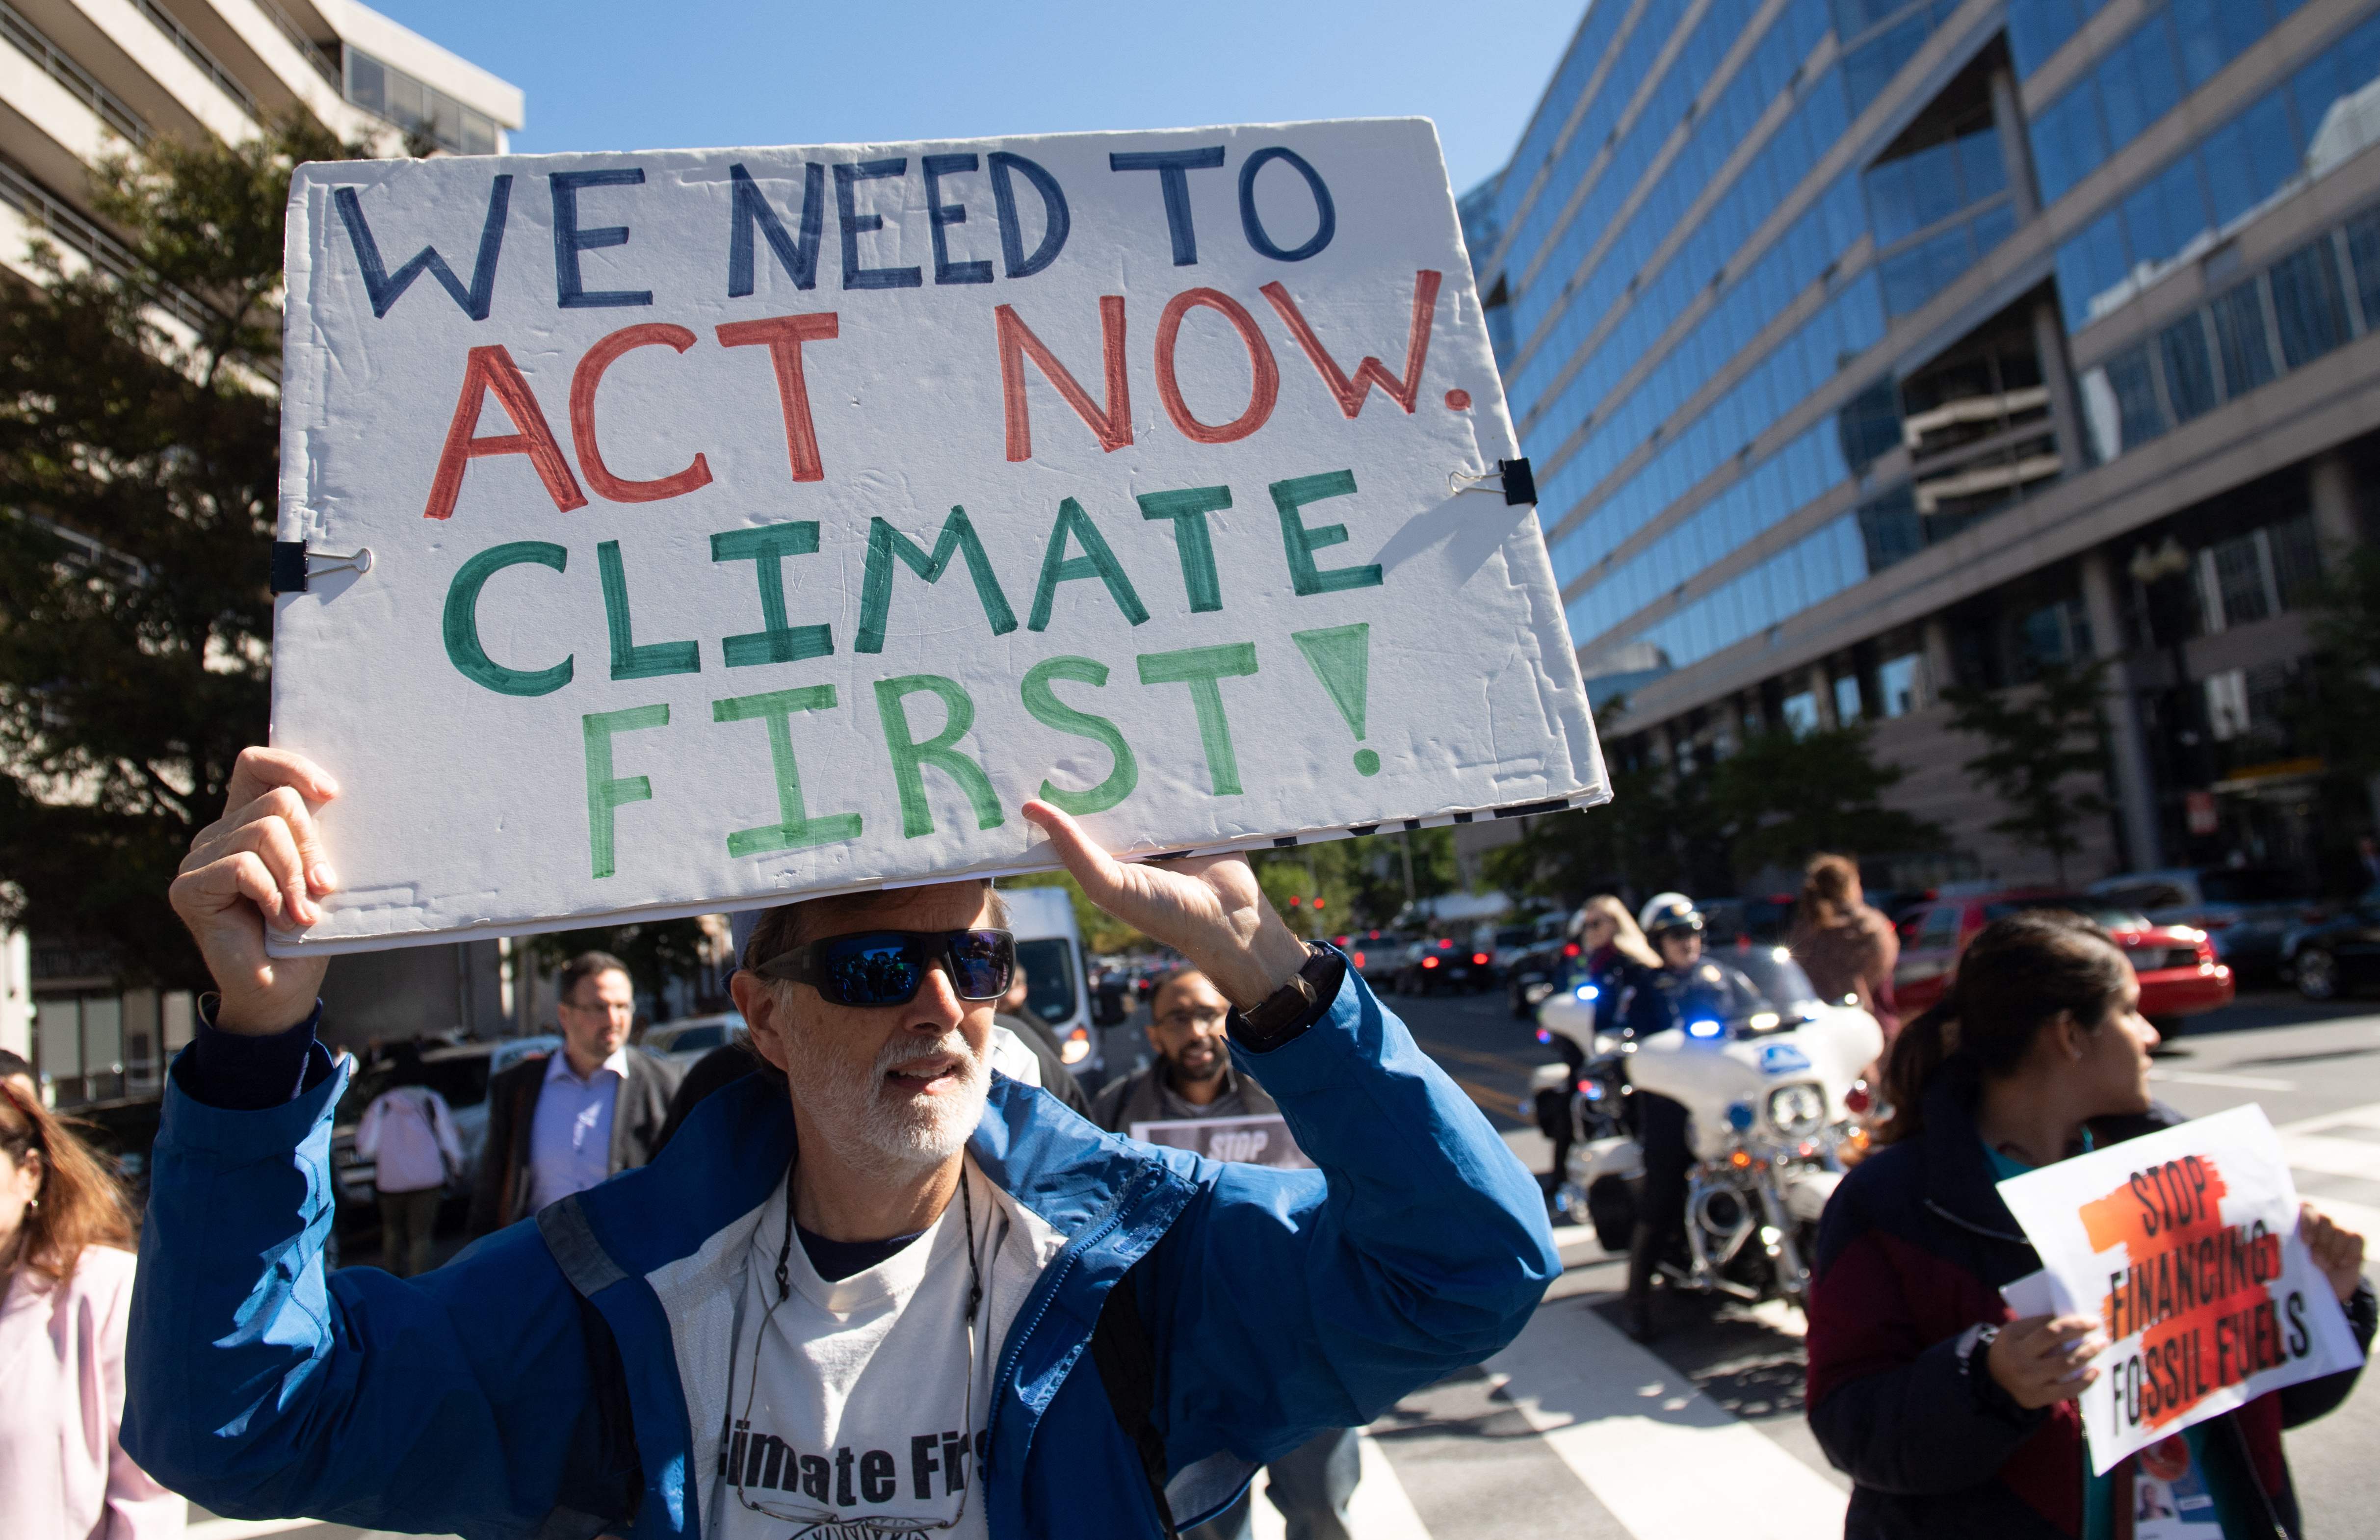 Delaying action on the climate crisis is not an option